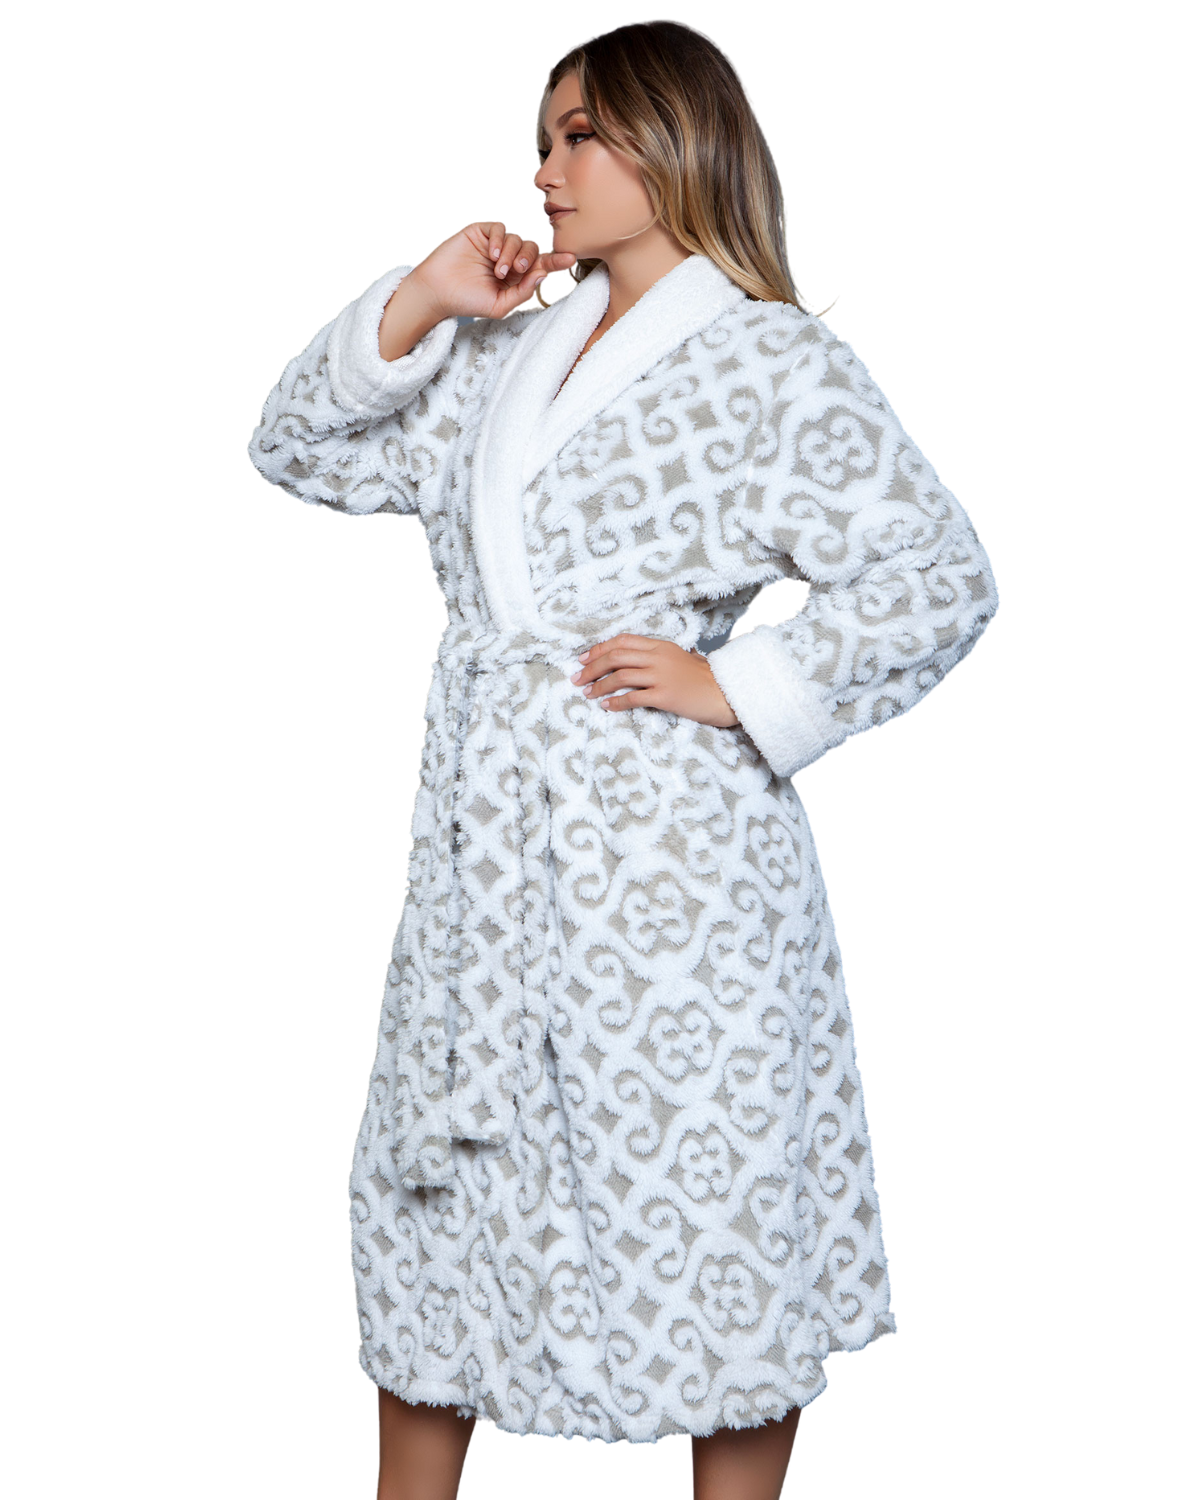 Model wearing a long robe with grey and white detailing